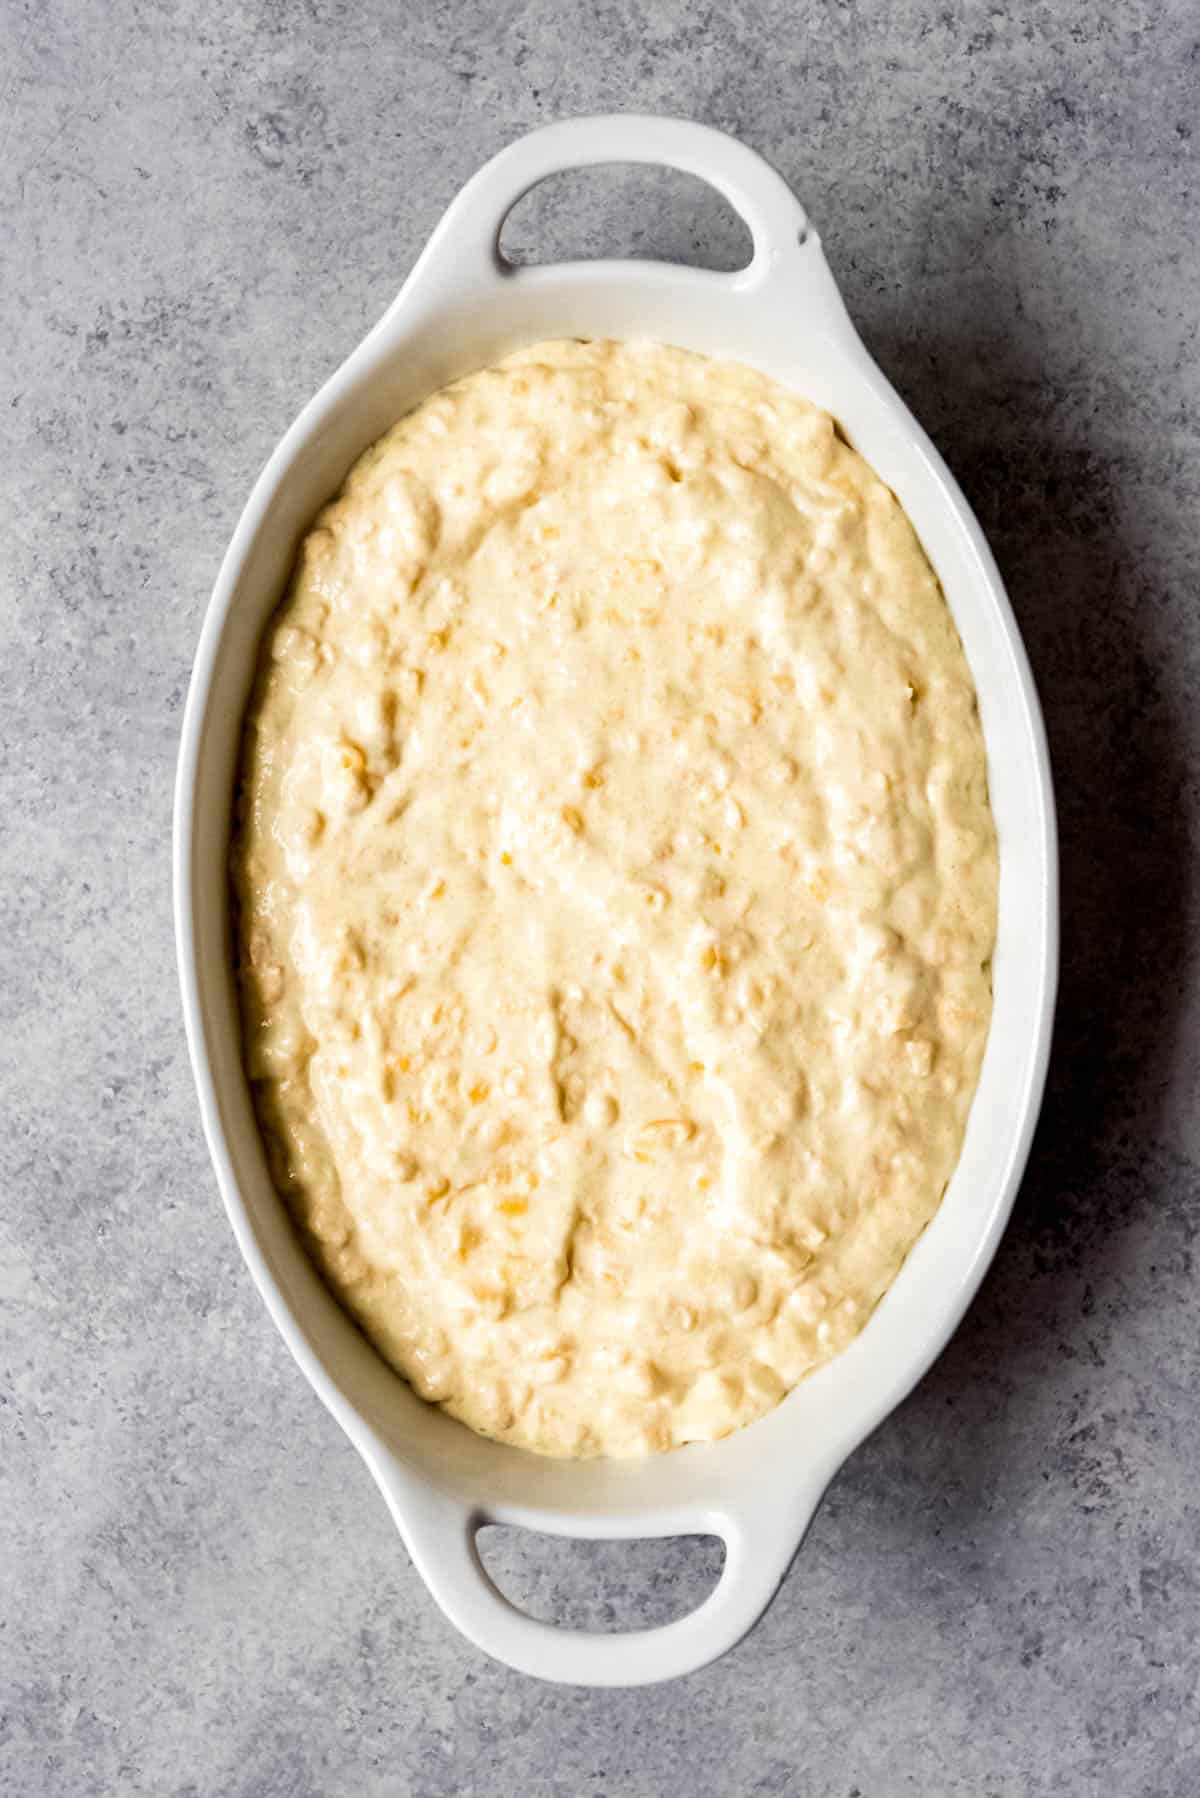 An image of a baking dish filled with corn casserole batter ready to go into the oven.